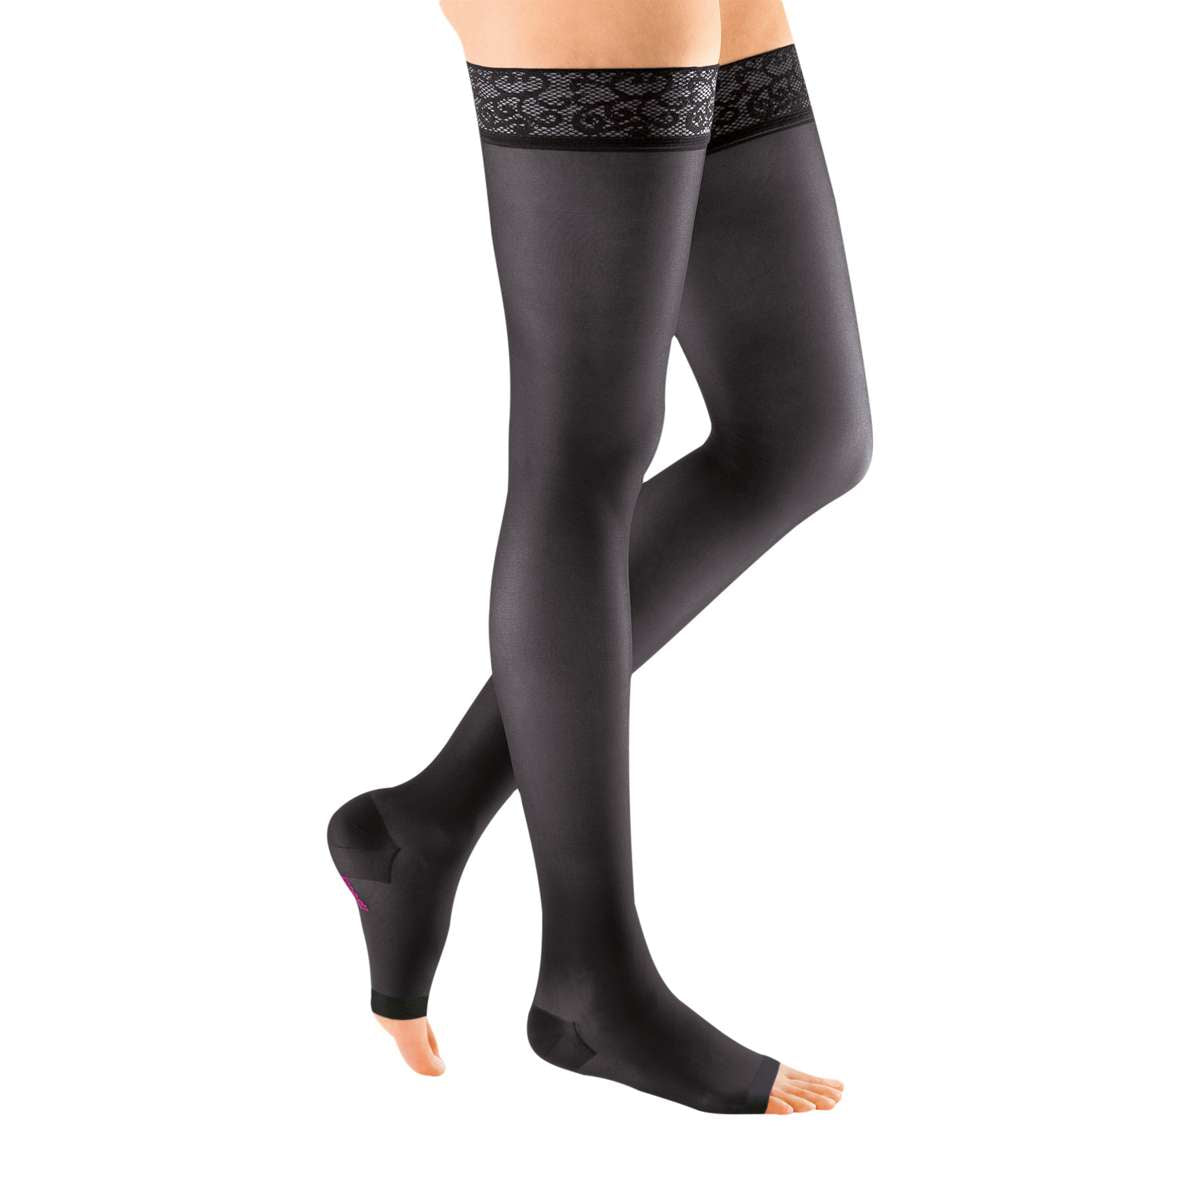 mediven sheer & soft 20-30 mmHg thigh lace topband open toe standard